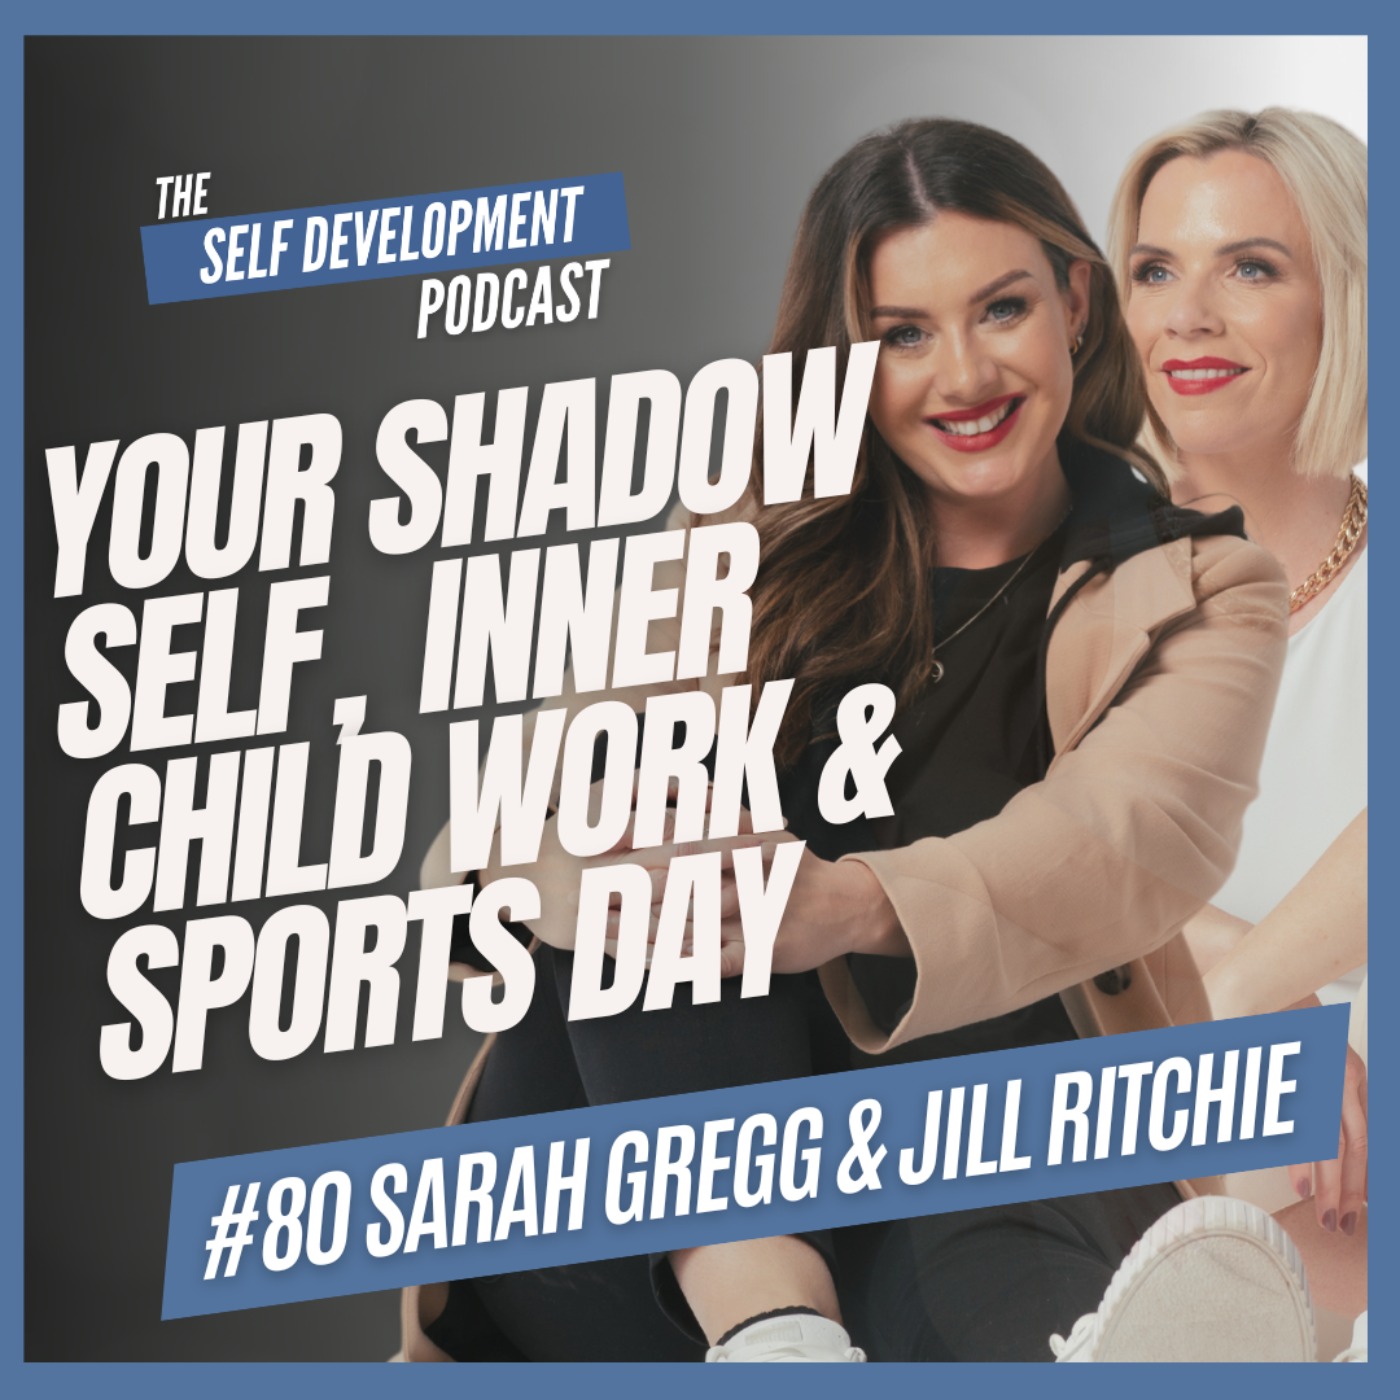 cover art for S2 E4: #80 Jill Ritchie & Sarah Gregg | Your Shadow Self, Inner Child & Sports Day | The Self Development Podcast